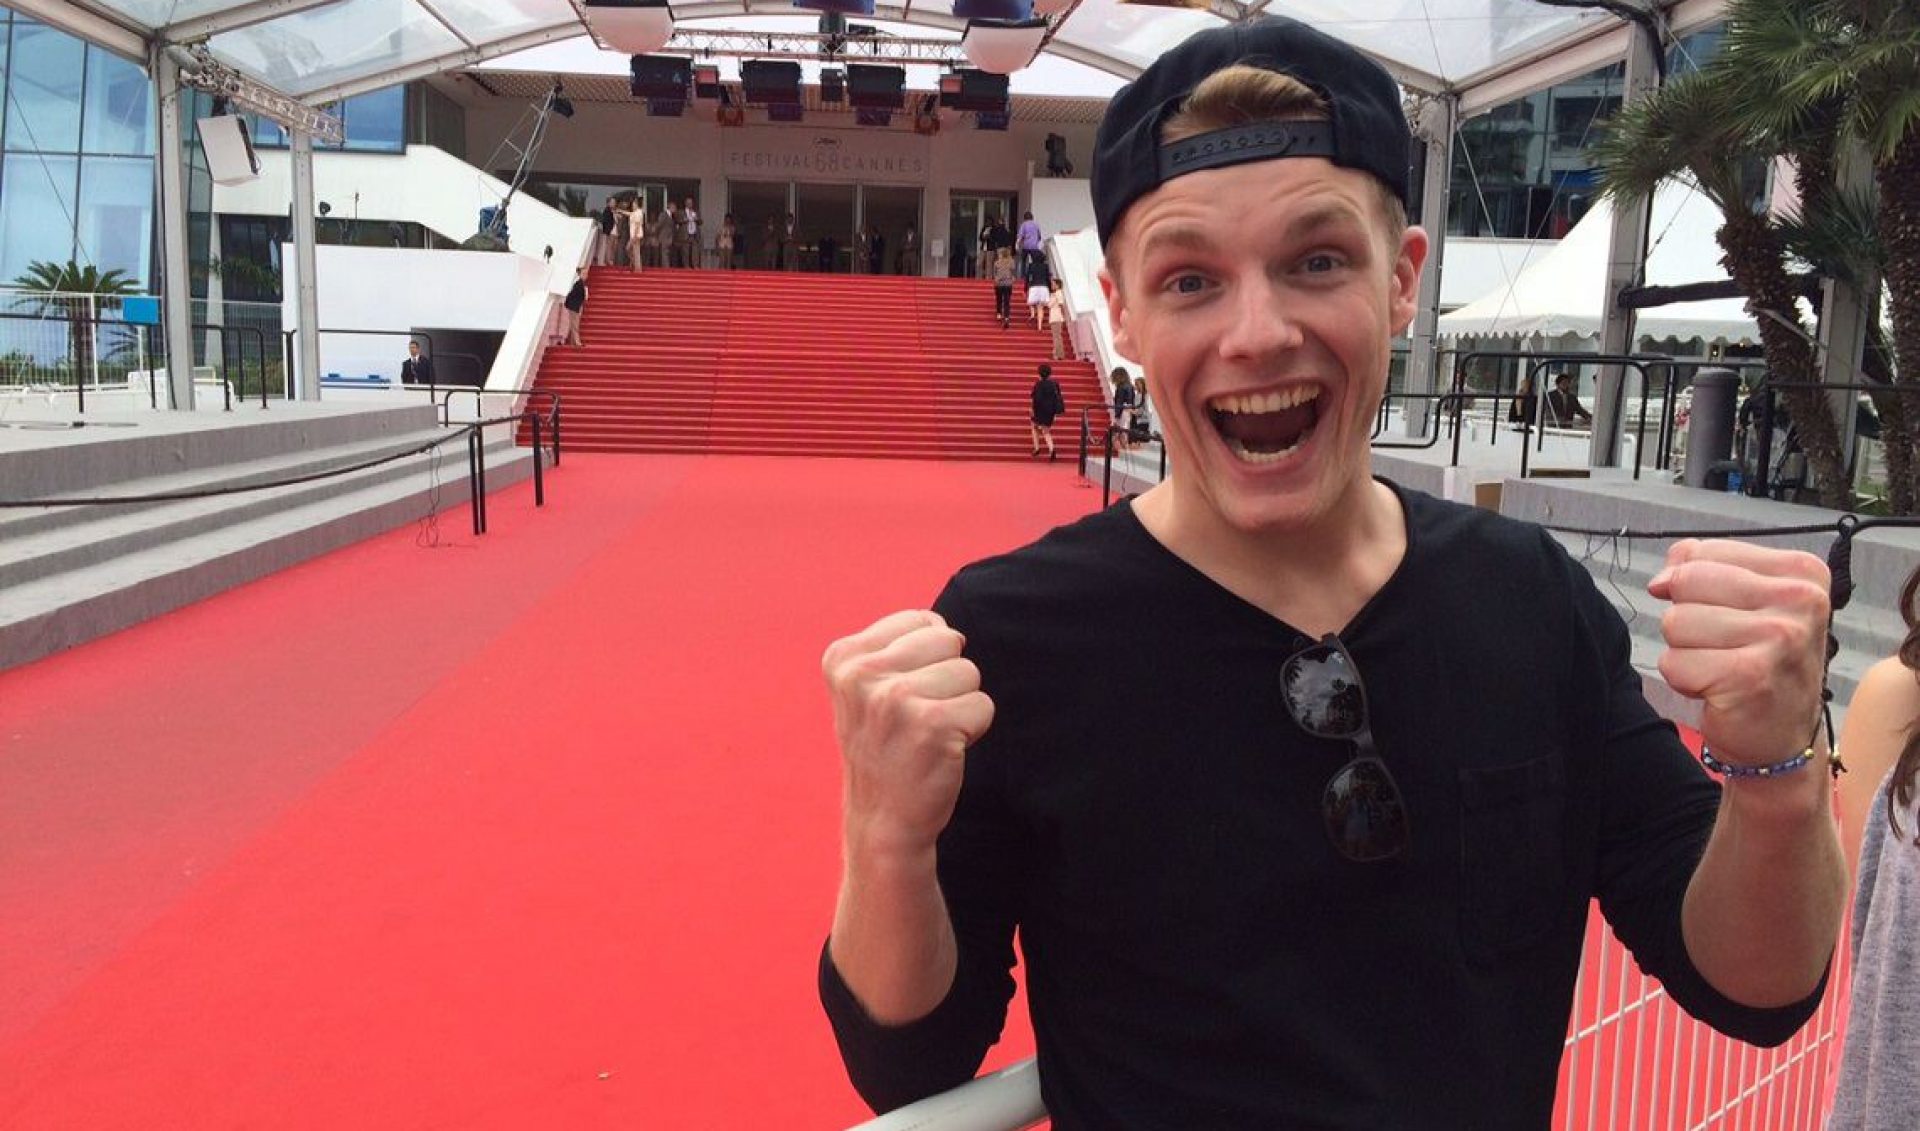 Dutch YouTube Star To Lead Feature Film About The Internet Crashing